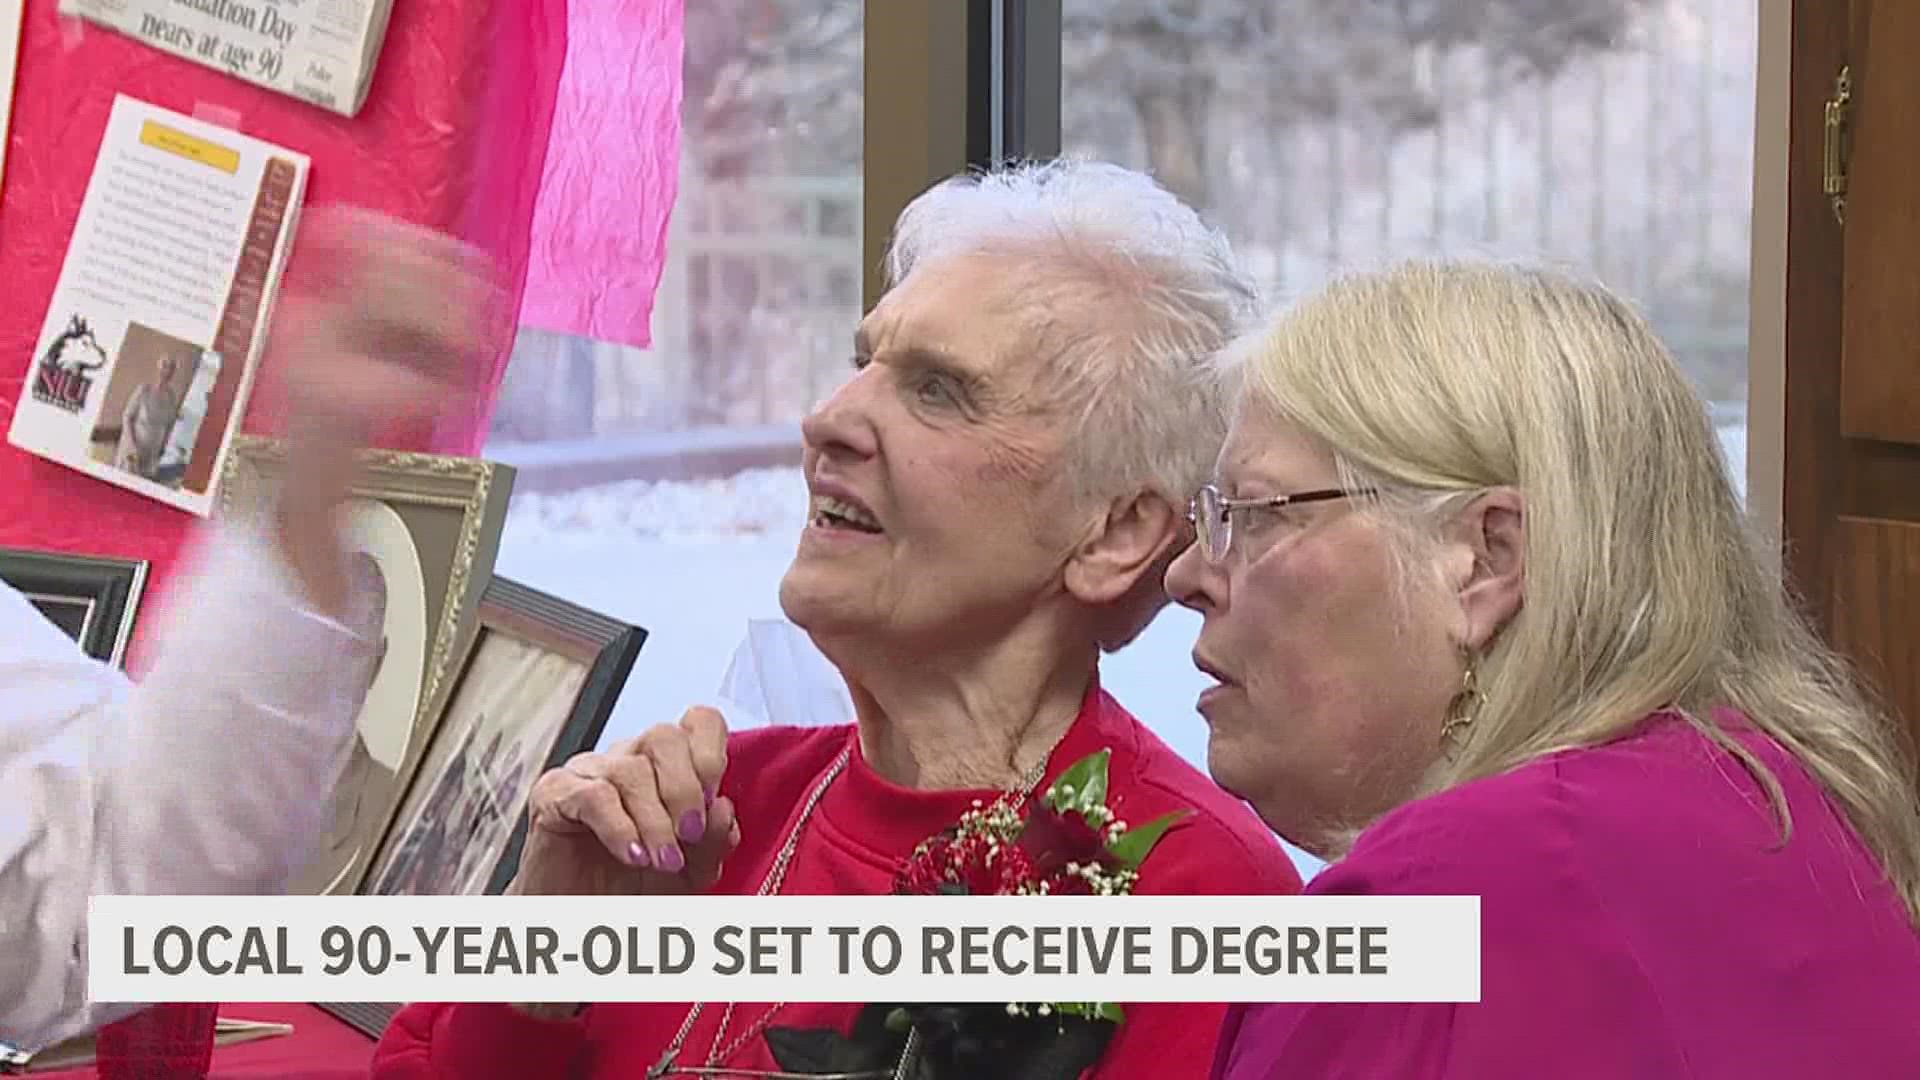 Joyce DeFauw set to get diploma after a near 70 year hiatus from school.